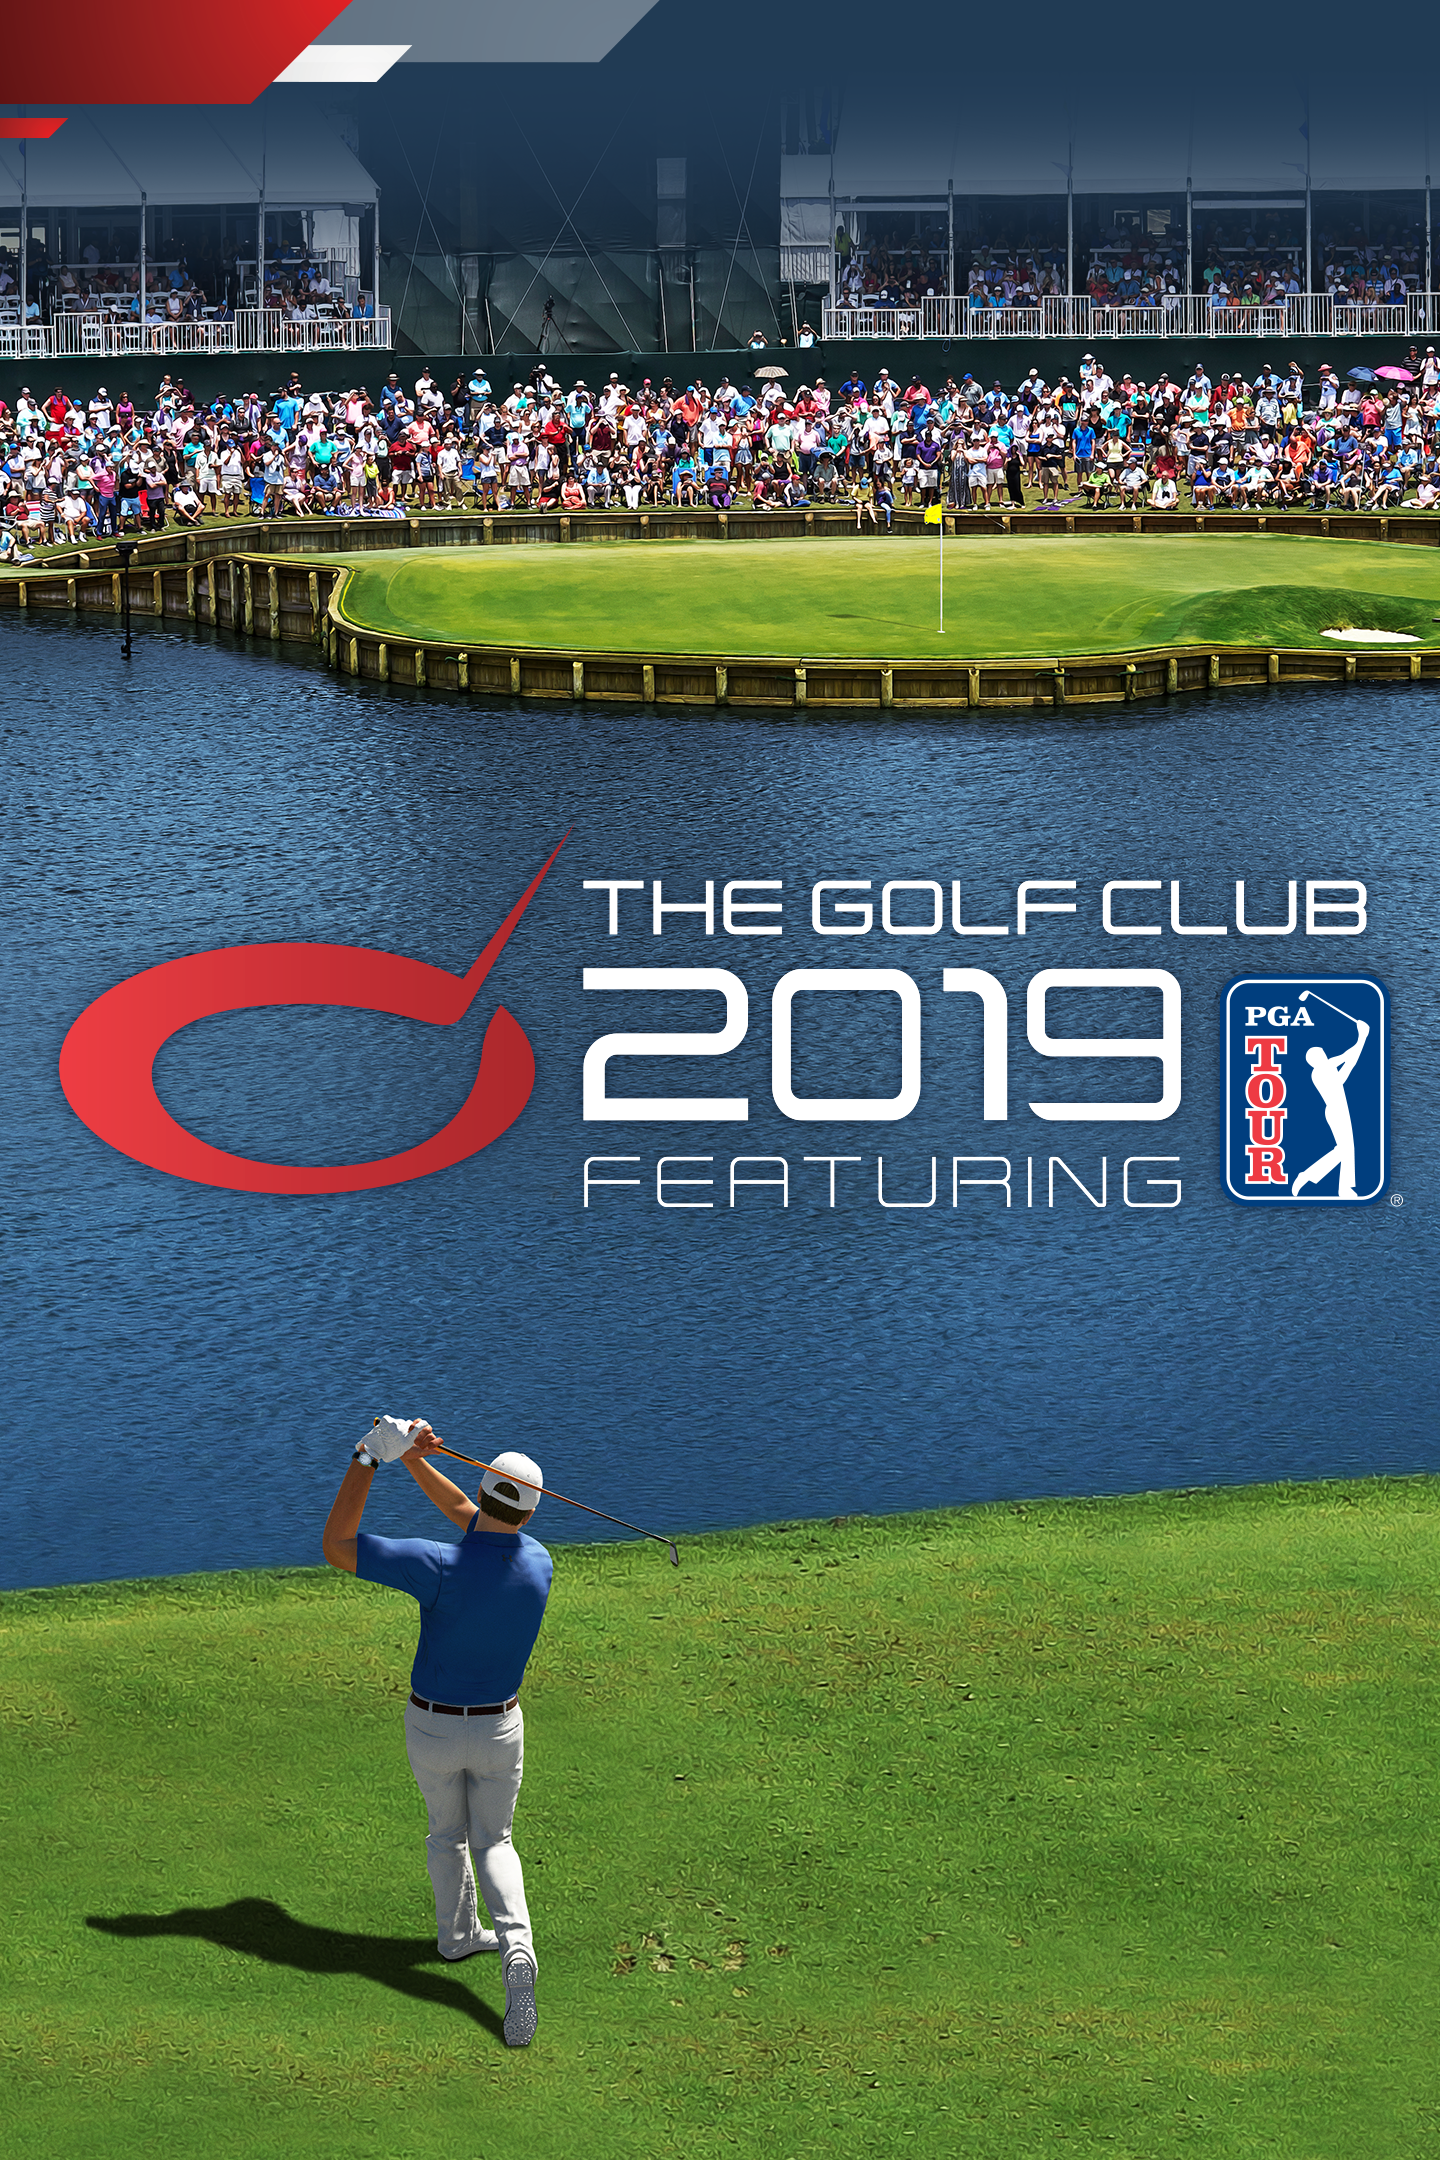 Image of The Golf Club 2019 featuring PGA TOUR